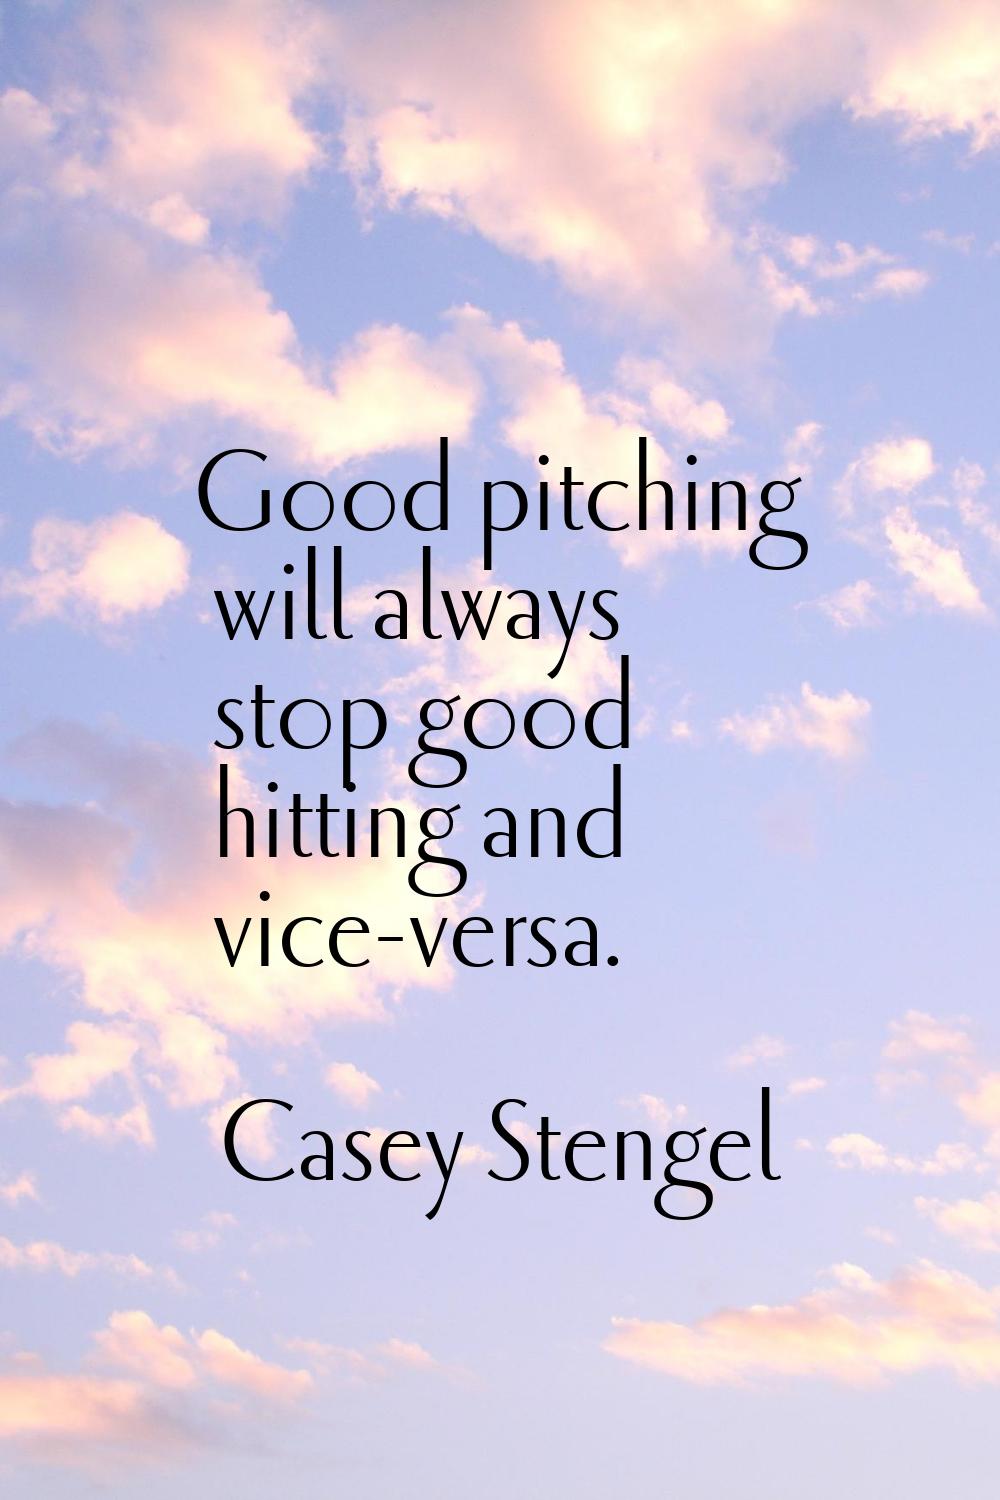 Good pitching will always stop good hitting and vice-versa.